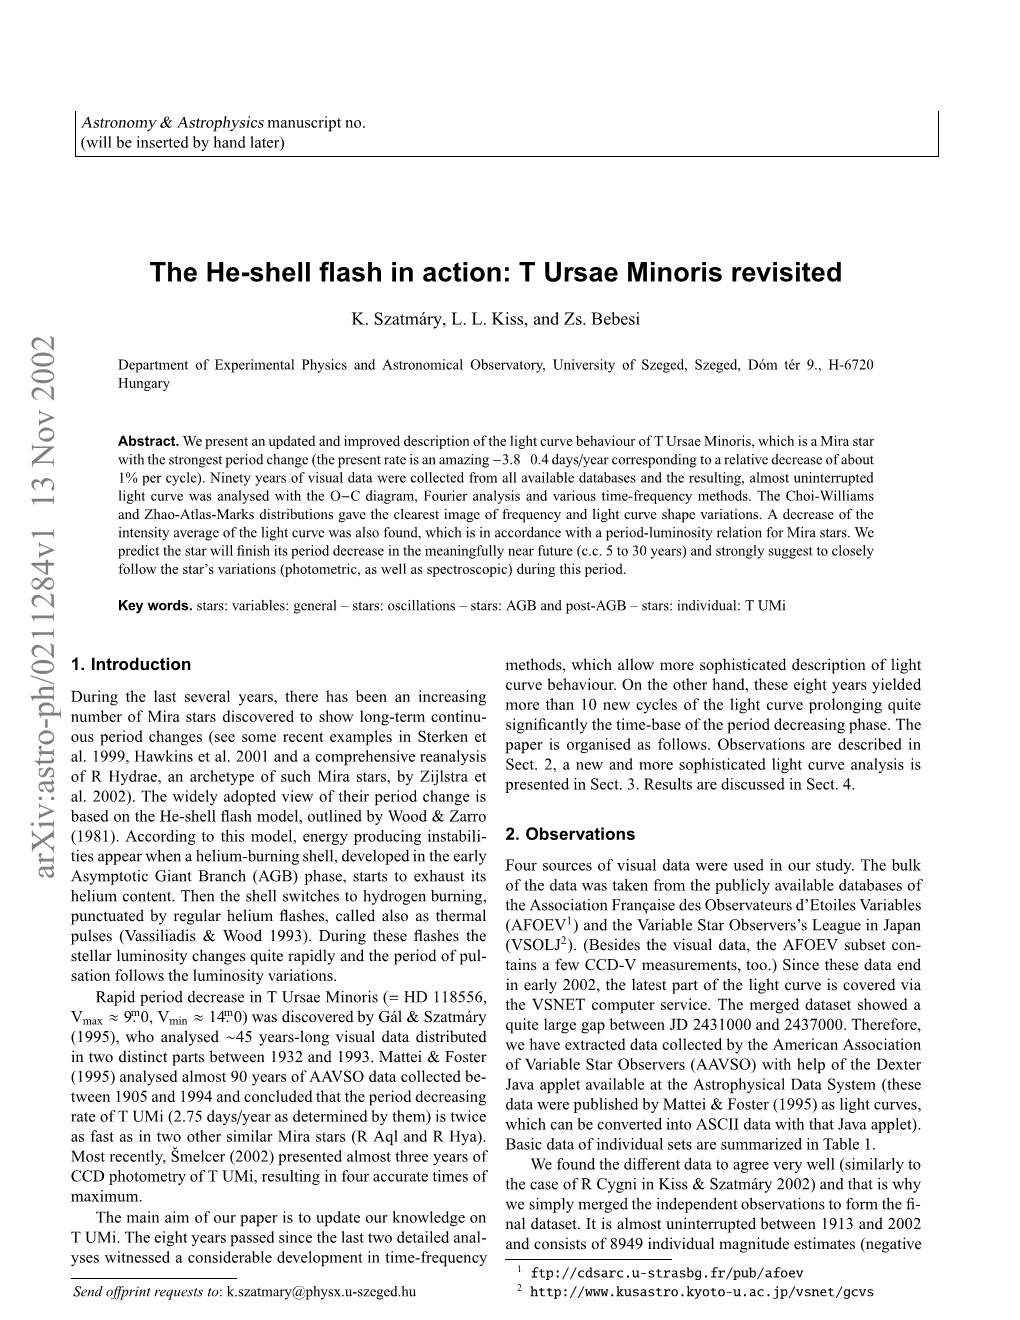 The He-Shell Flash in Action: T Ursae Minoris Revisited